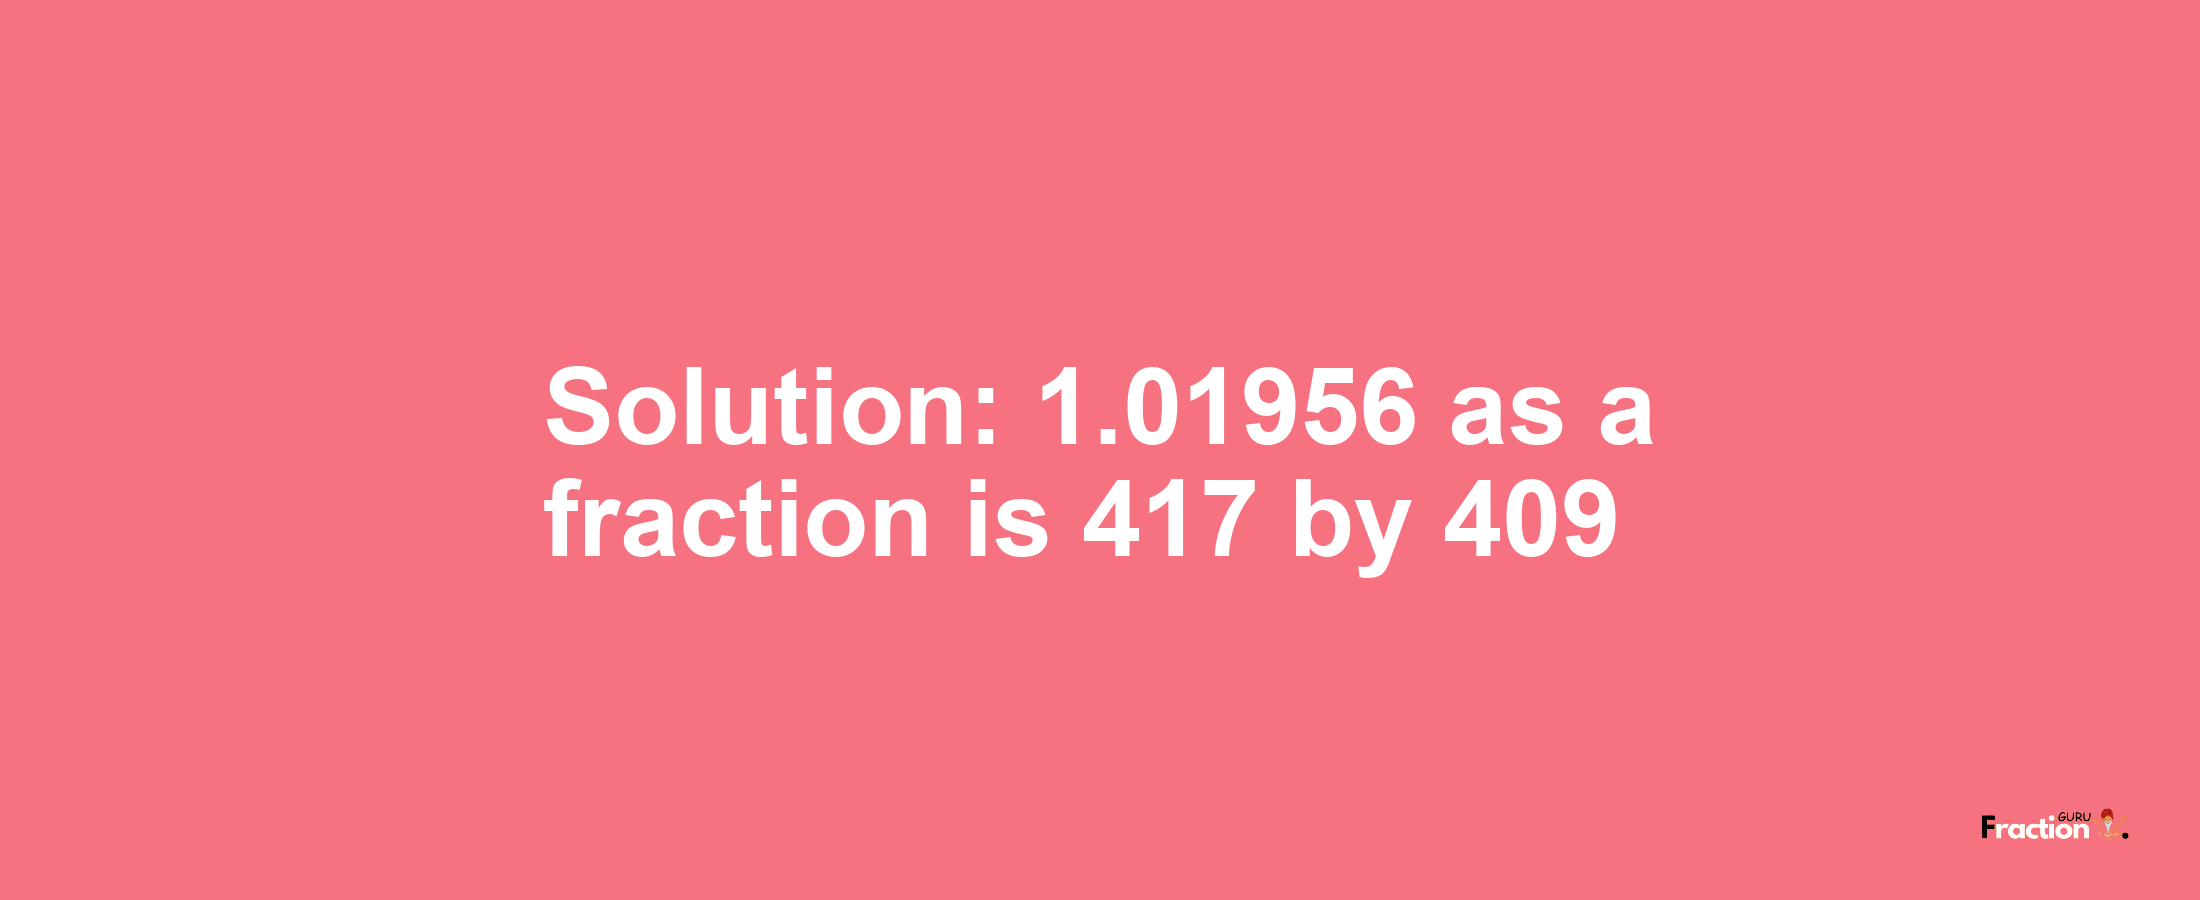 Solution:1.01956 as a fraction is 417/409